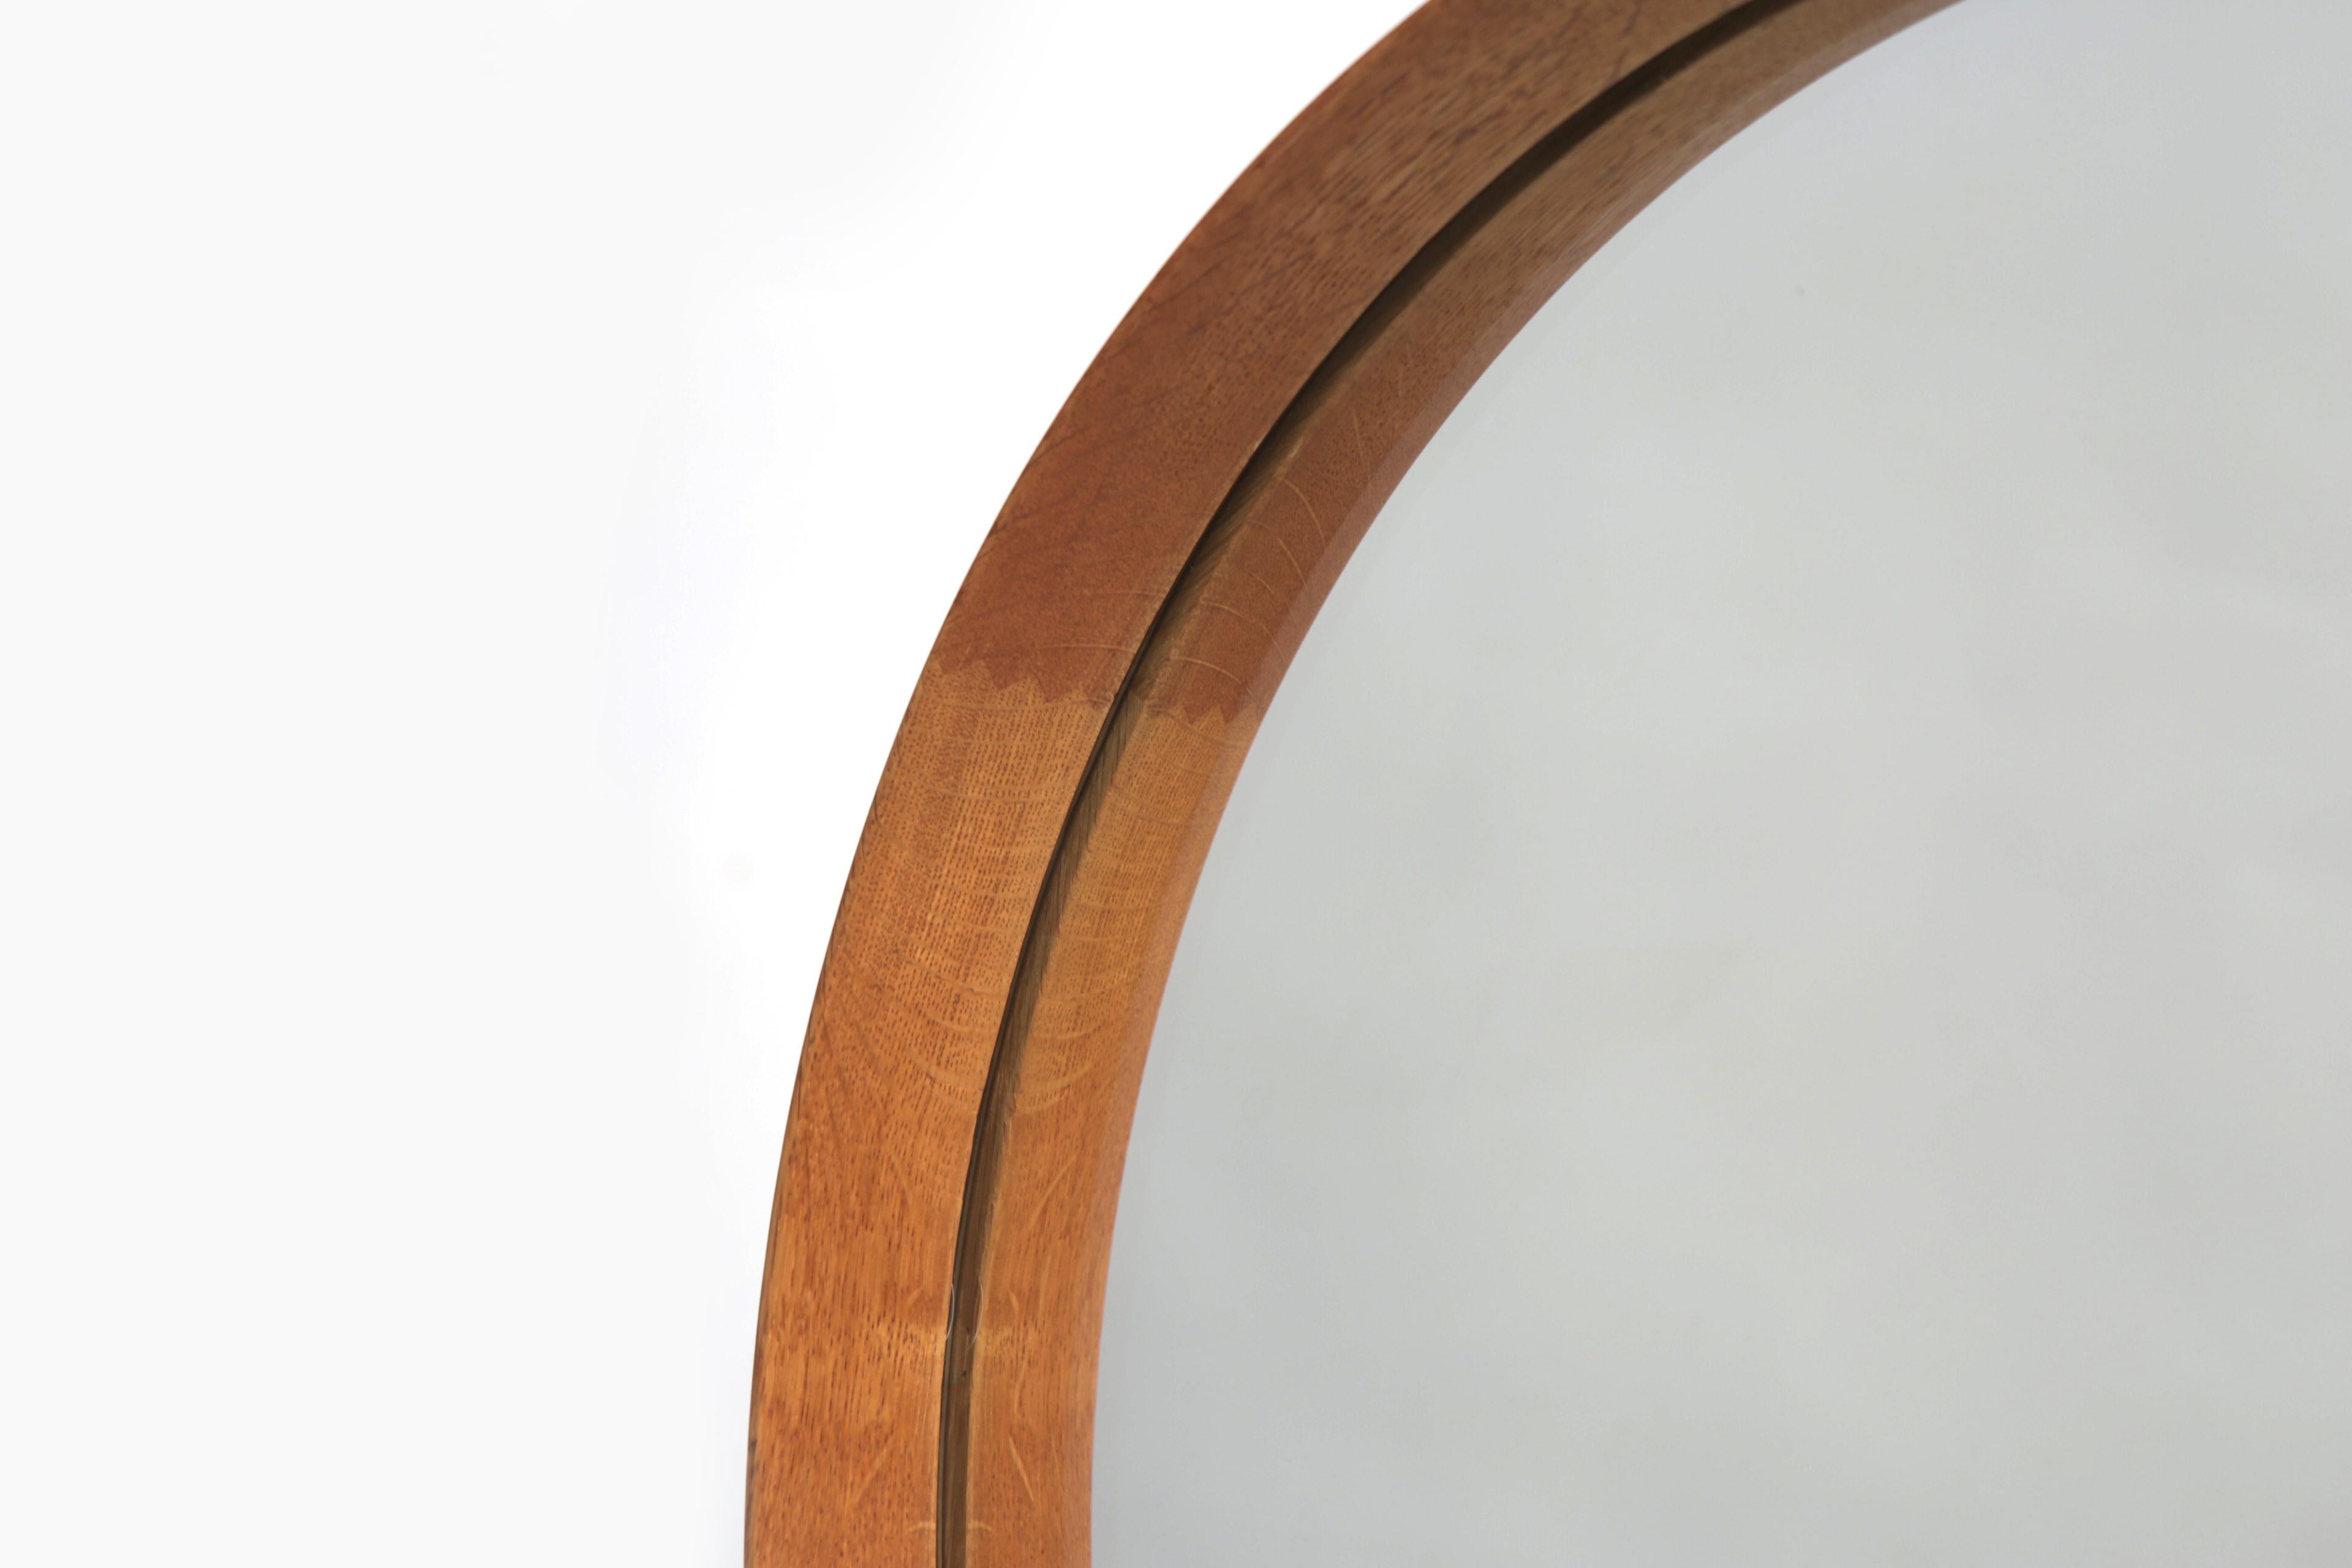 Uno & Östen Kristiansson oak table mirror model 406 by Luxus, Sweden, 1960s.

This large framed table mirror in oak is balanced on a wooden stand that pivots on an adjustable oakwood frame.

Designed by Uno & Östen Kristiansson. Manufactured by